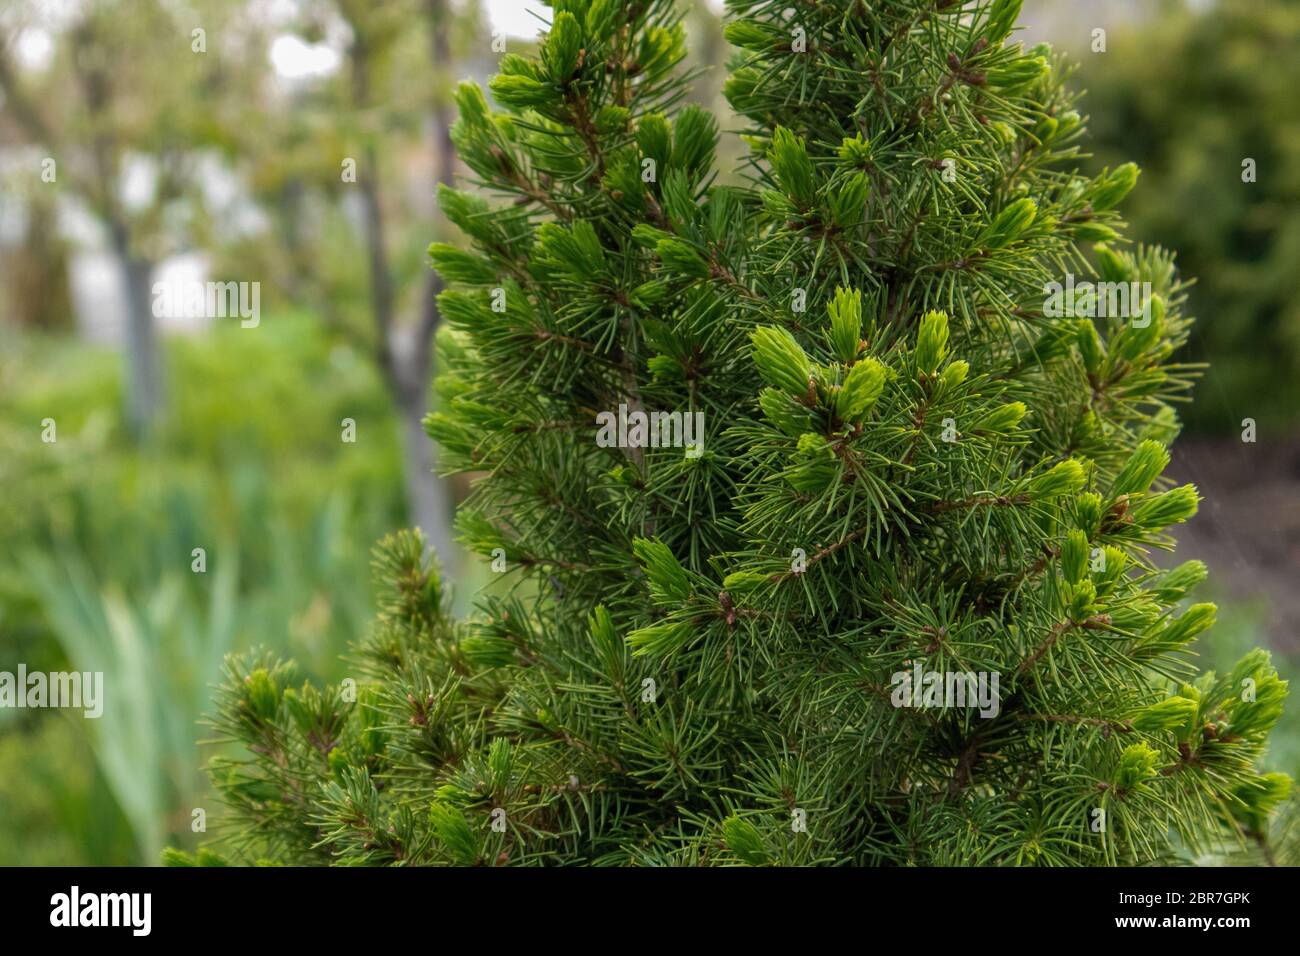 Closeup of fir branches with young buds. Stock Photo